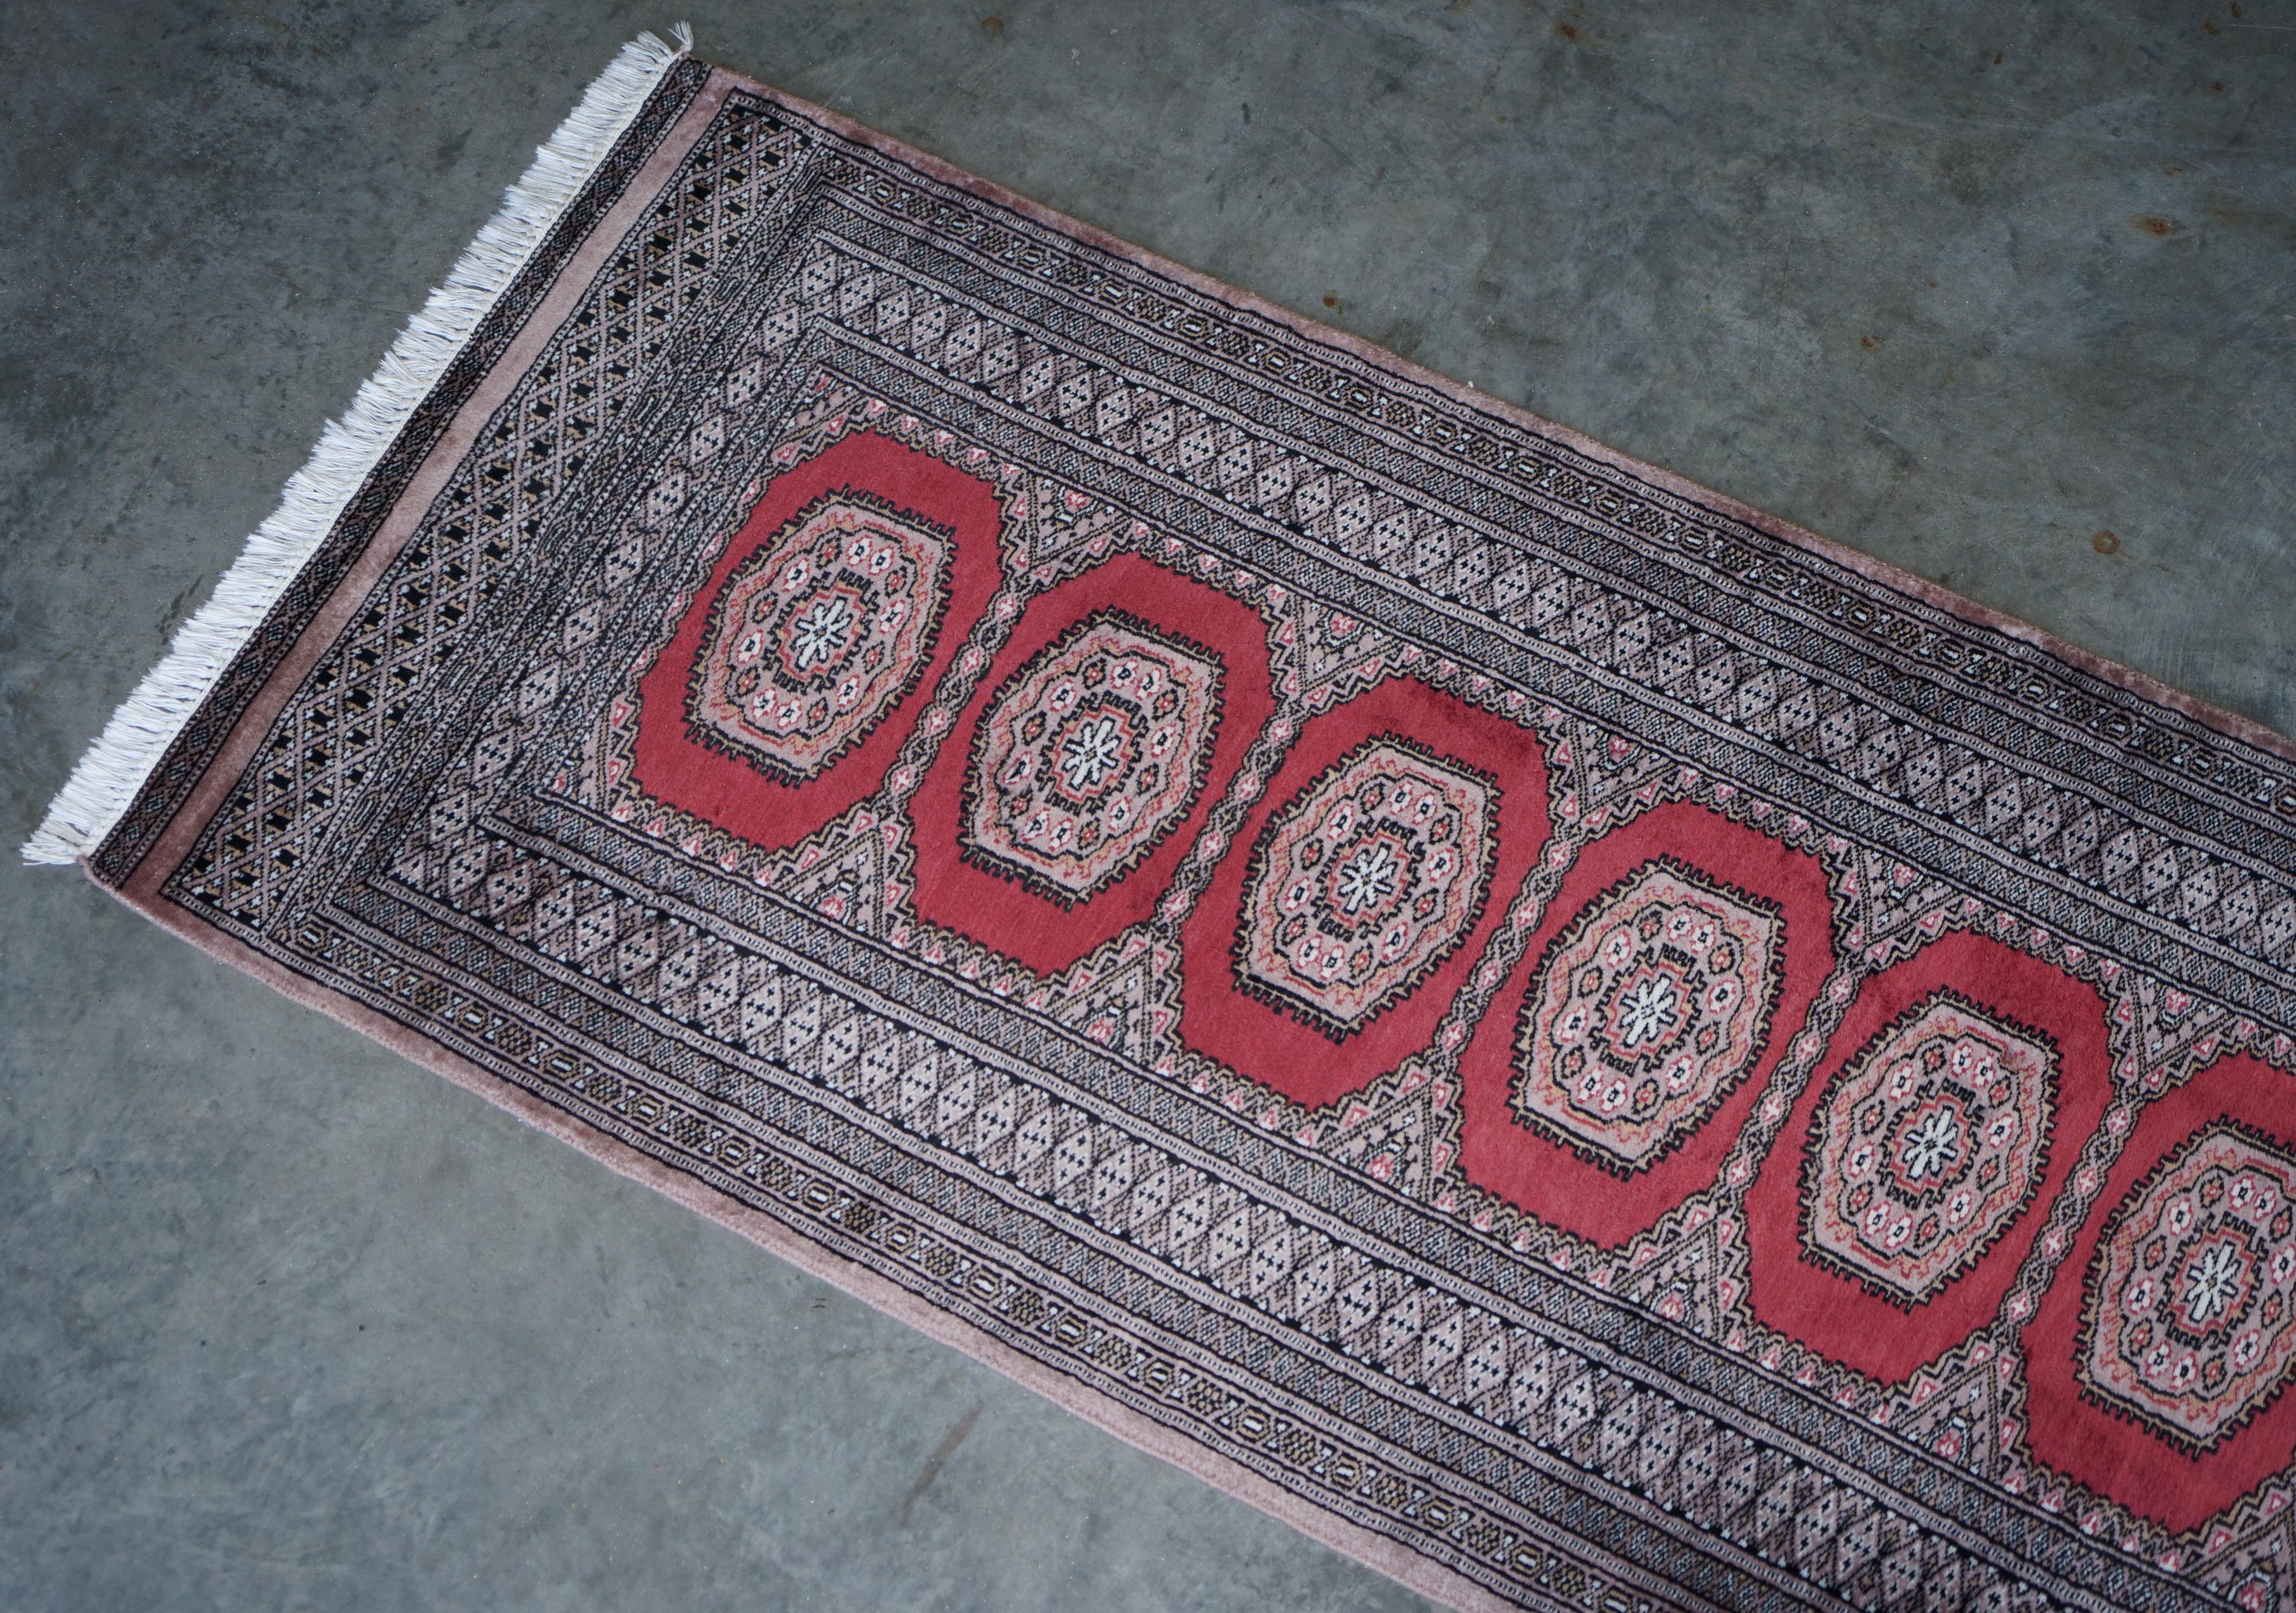 We are delighted to offer for sale this large country house, Antique French runner rug with lovely Aztek Kilim style design circa 1860-1880

This piece was last sold for 2500 euros around 40 years ago by TCH, it is circa 1860-1880, hand made in